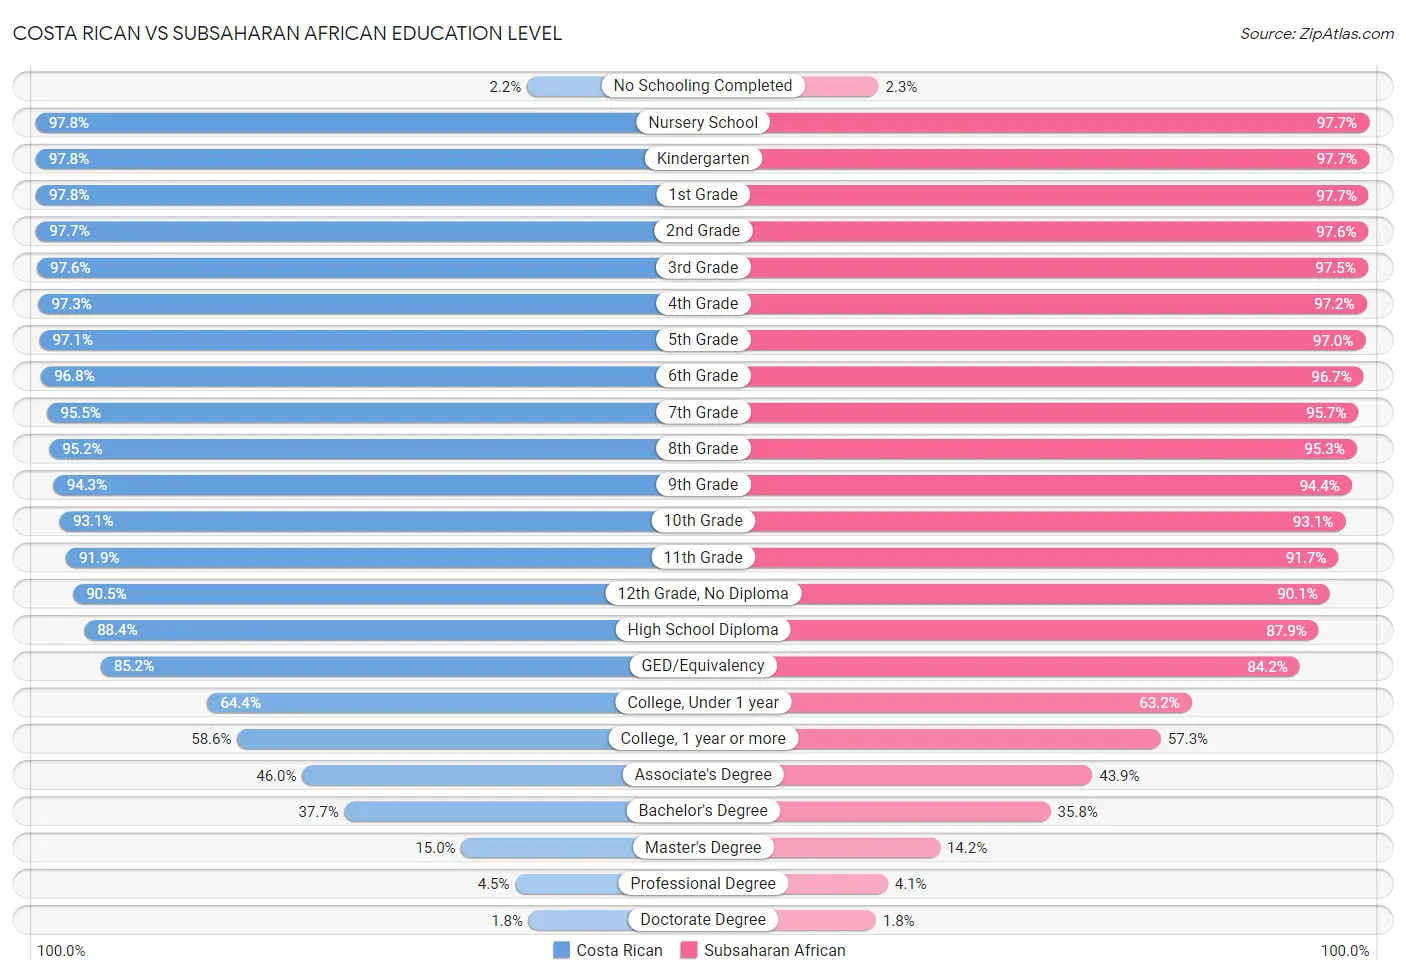 Costa Rican vs Subsaharan African Education Level